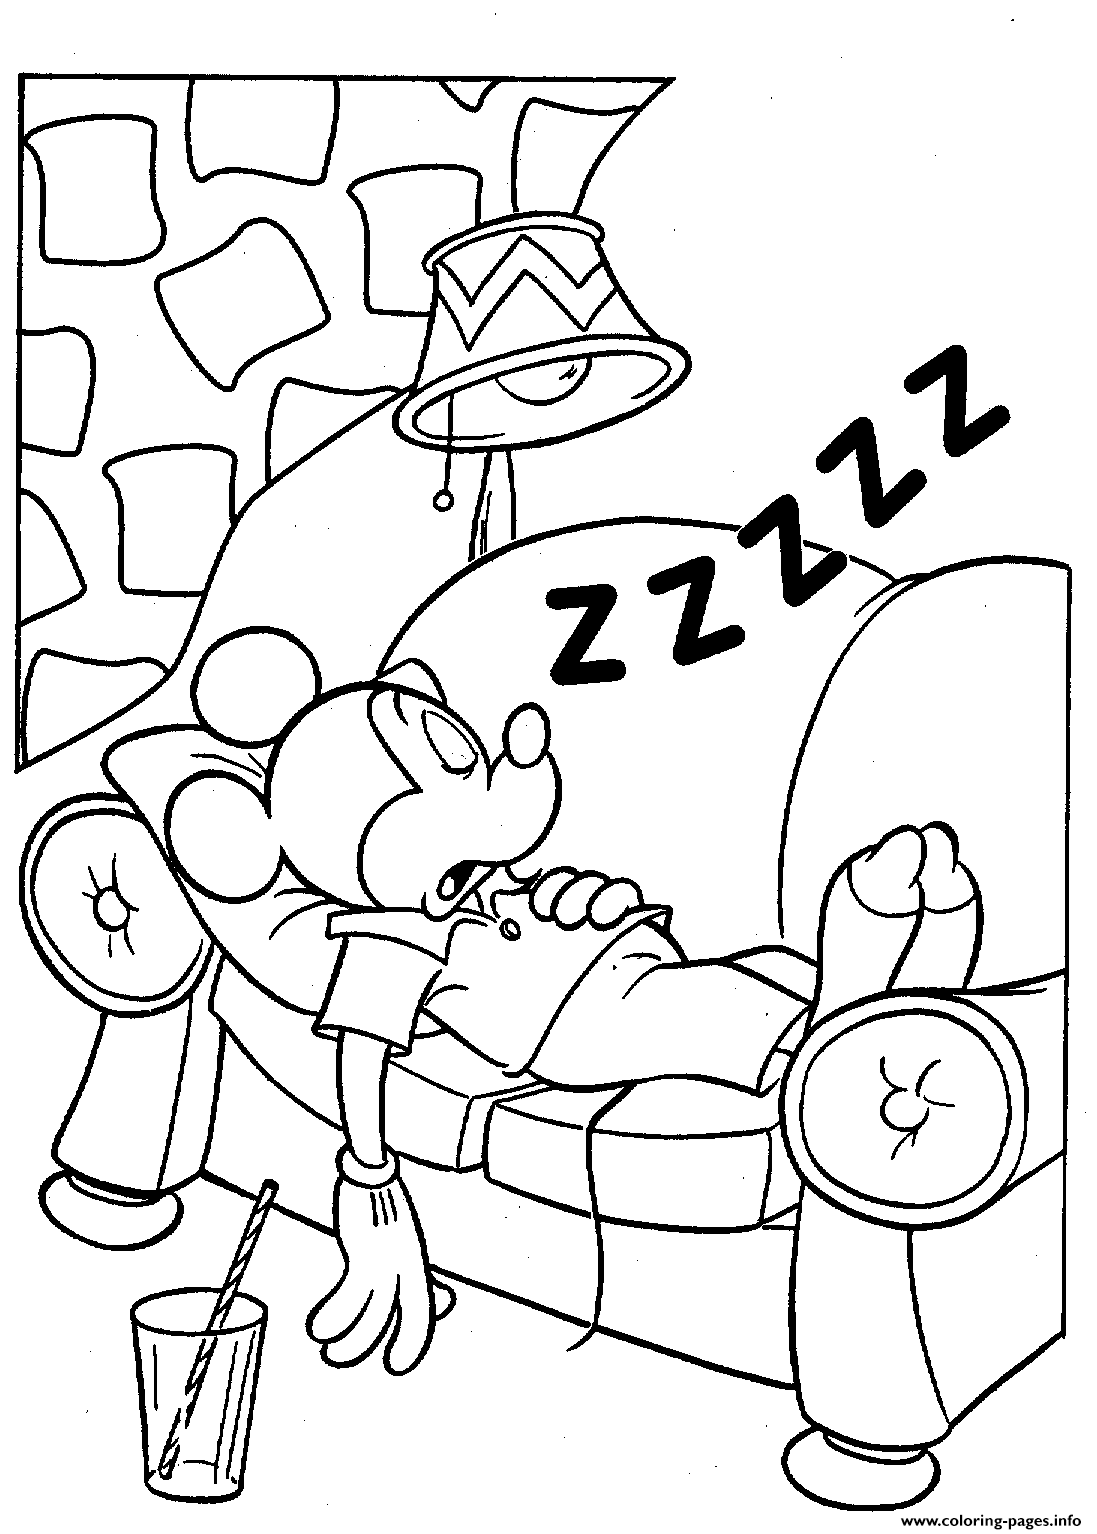 Mickey Falls Asleep On The Couch Disney 4788 coloring